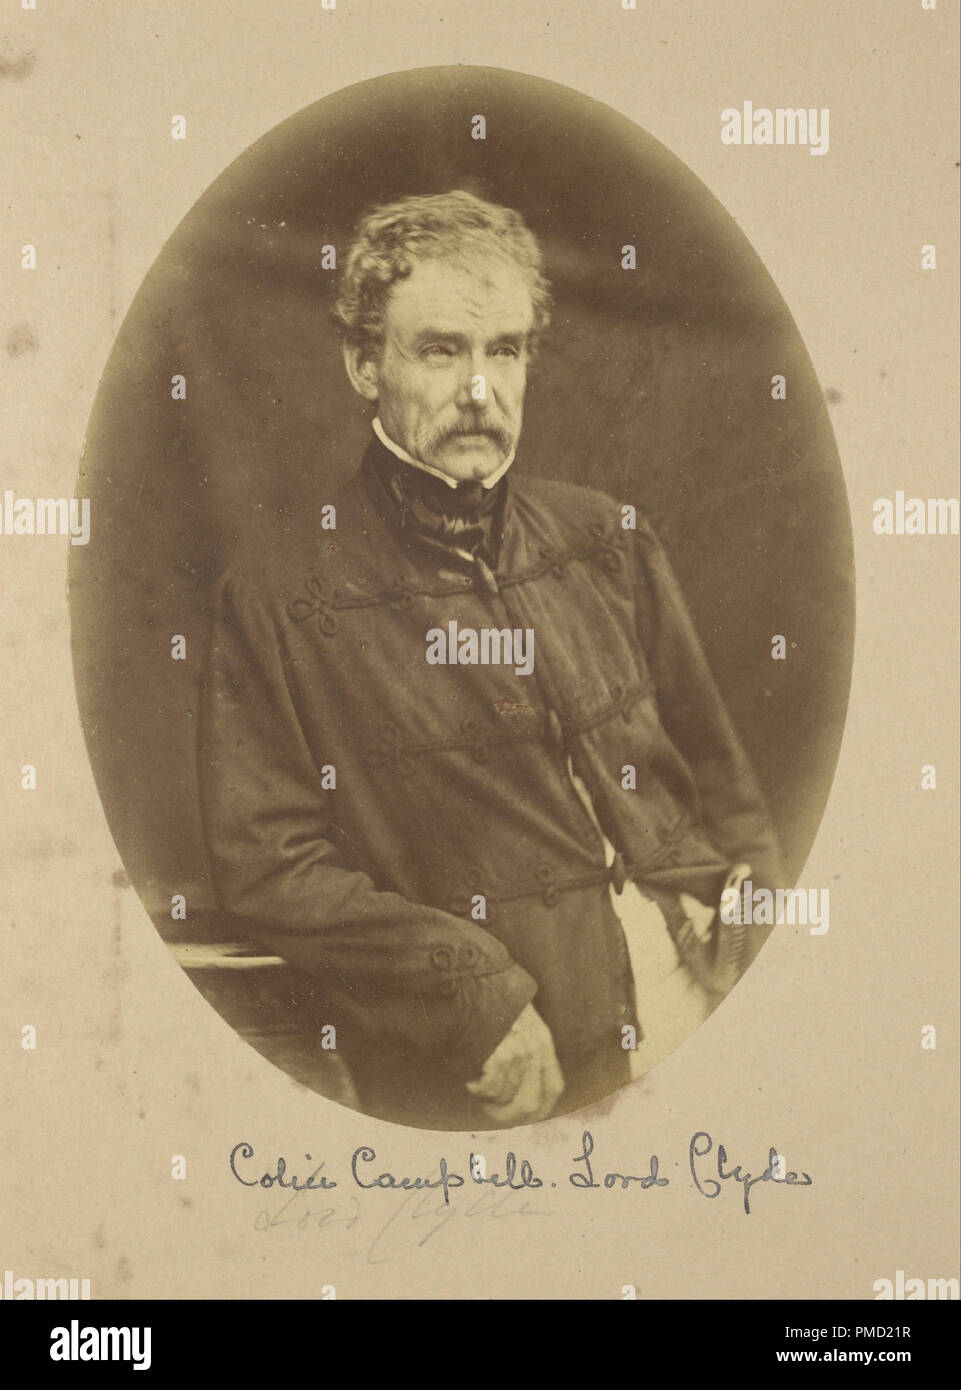 [Portrait of Sir Colin Campbell Lord Clyde, Commander-in-Chief in India]. Date/Period: 1858. Print. Albumen silver. Height: 152 mm (5.98 in); Width: 113 mm (4.44 in). Author: Felice Beato. Stock Photo